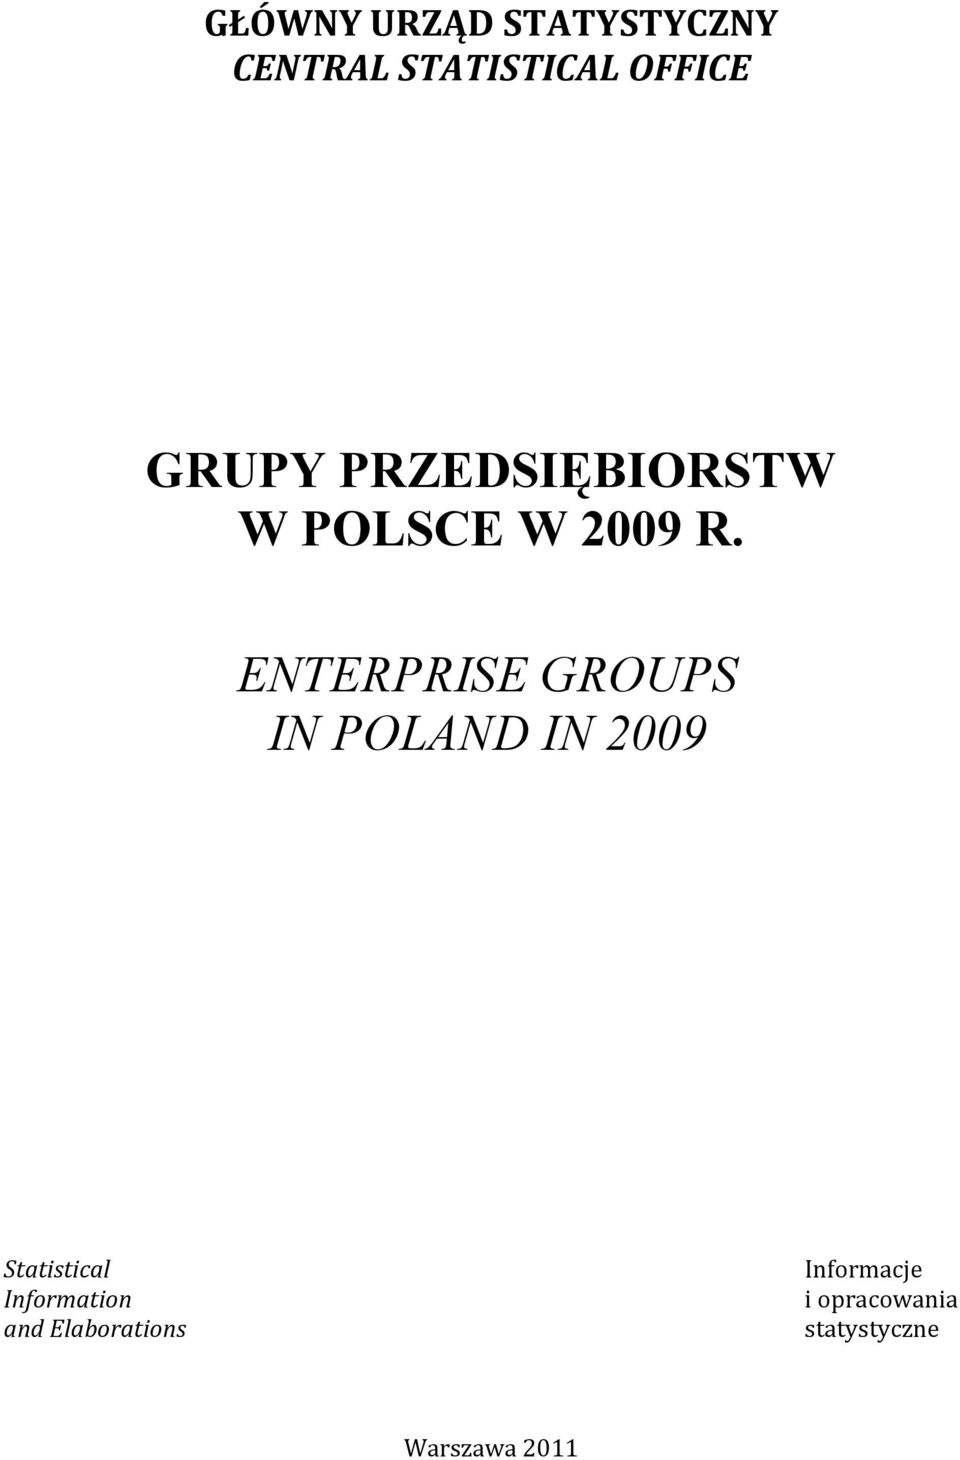 ENTERPRISE GROUPS IN POLAND IN 2009 Statistical